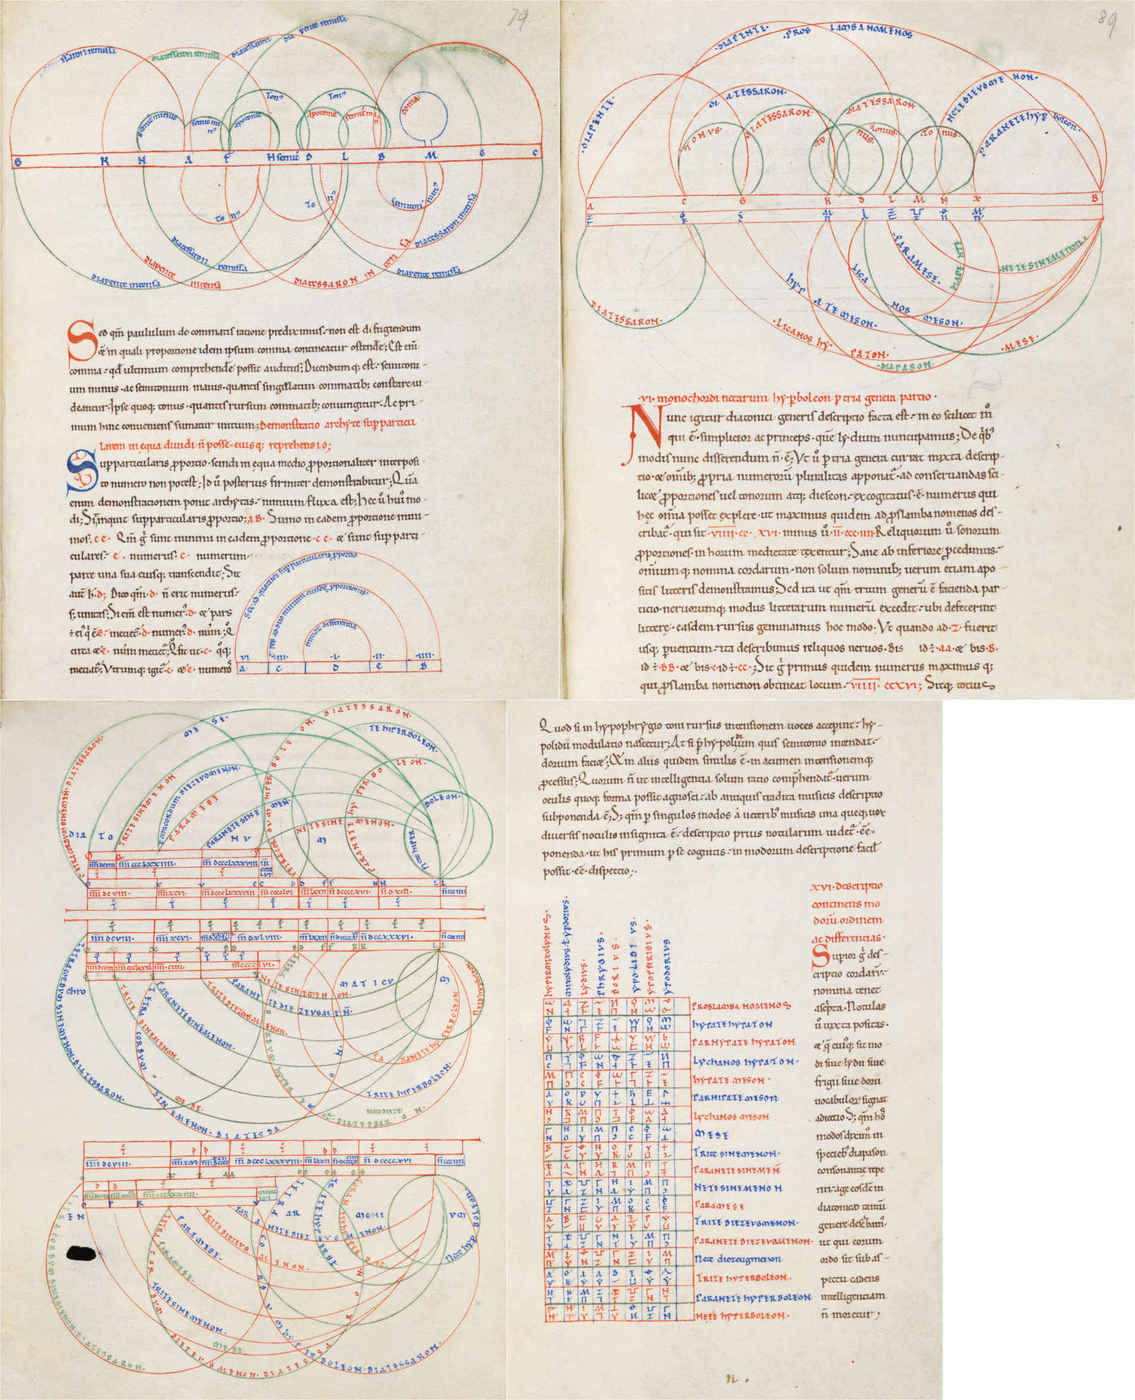 VadSlg Ms. 296 (1100s manuscript of Boethius’s De arithmetica/​_De institutione musica): “The polychrome schematic illustrations in this 12th century manuscript are particularly carefully made.” Indeed. This image combines pages 79/​89/​93/​99, which show off the diagrams, tables, drop caps, and rubricated text employed in the discussion of music theory & multiplication.